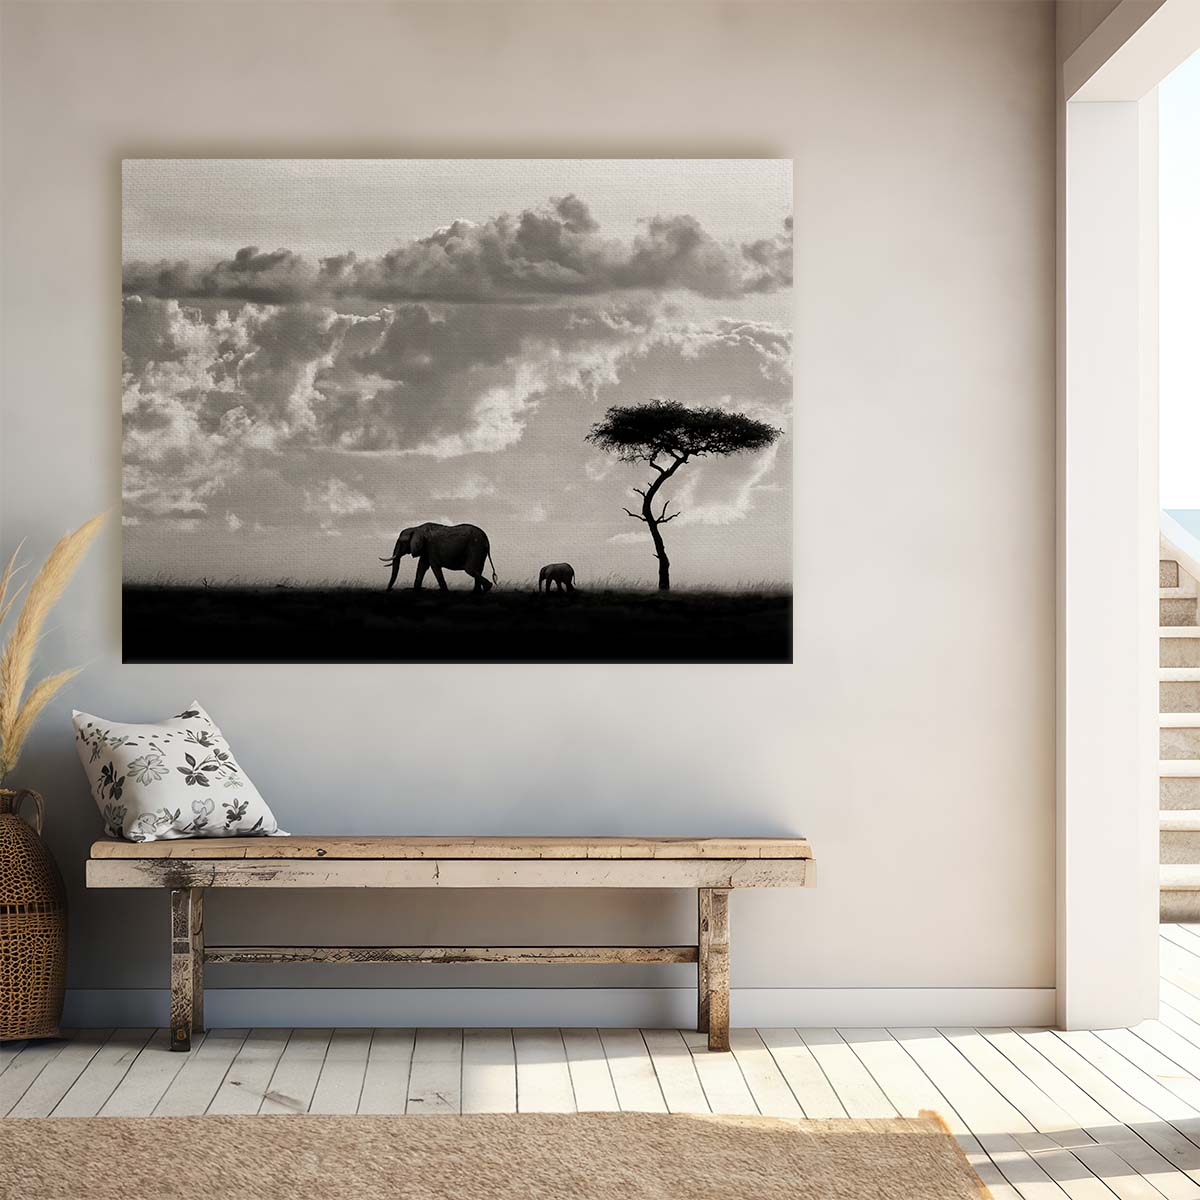 Majestic African Elephant Family Silhouette Wall Art by Luxuriance Designs. Made in USA.